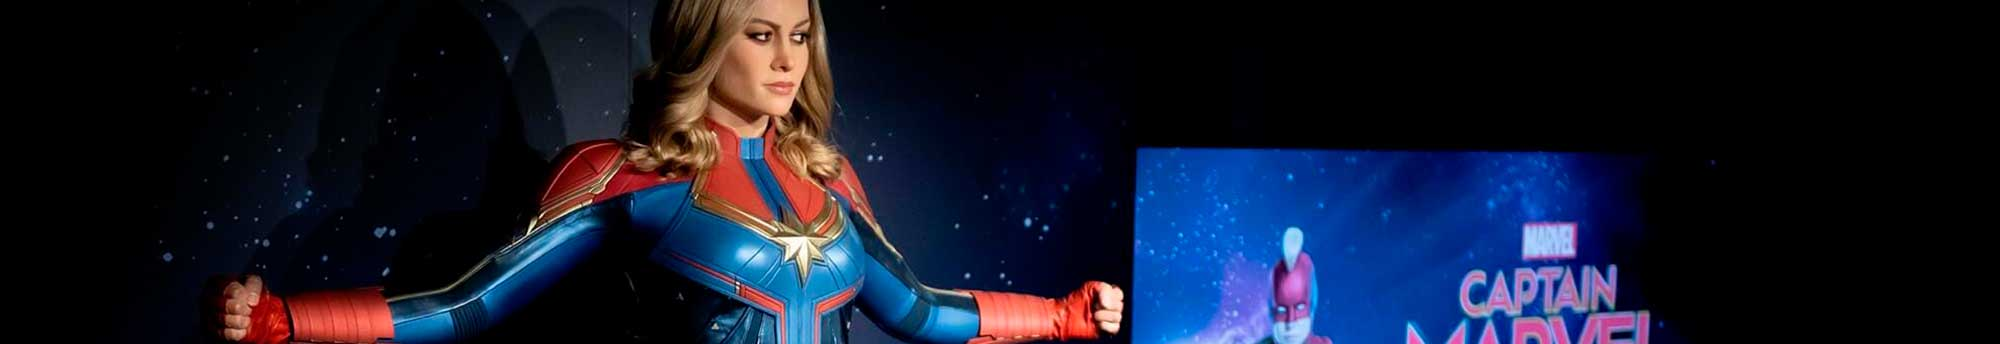 Museo Madame Tussauds Londres + Marvel 4D